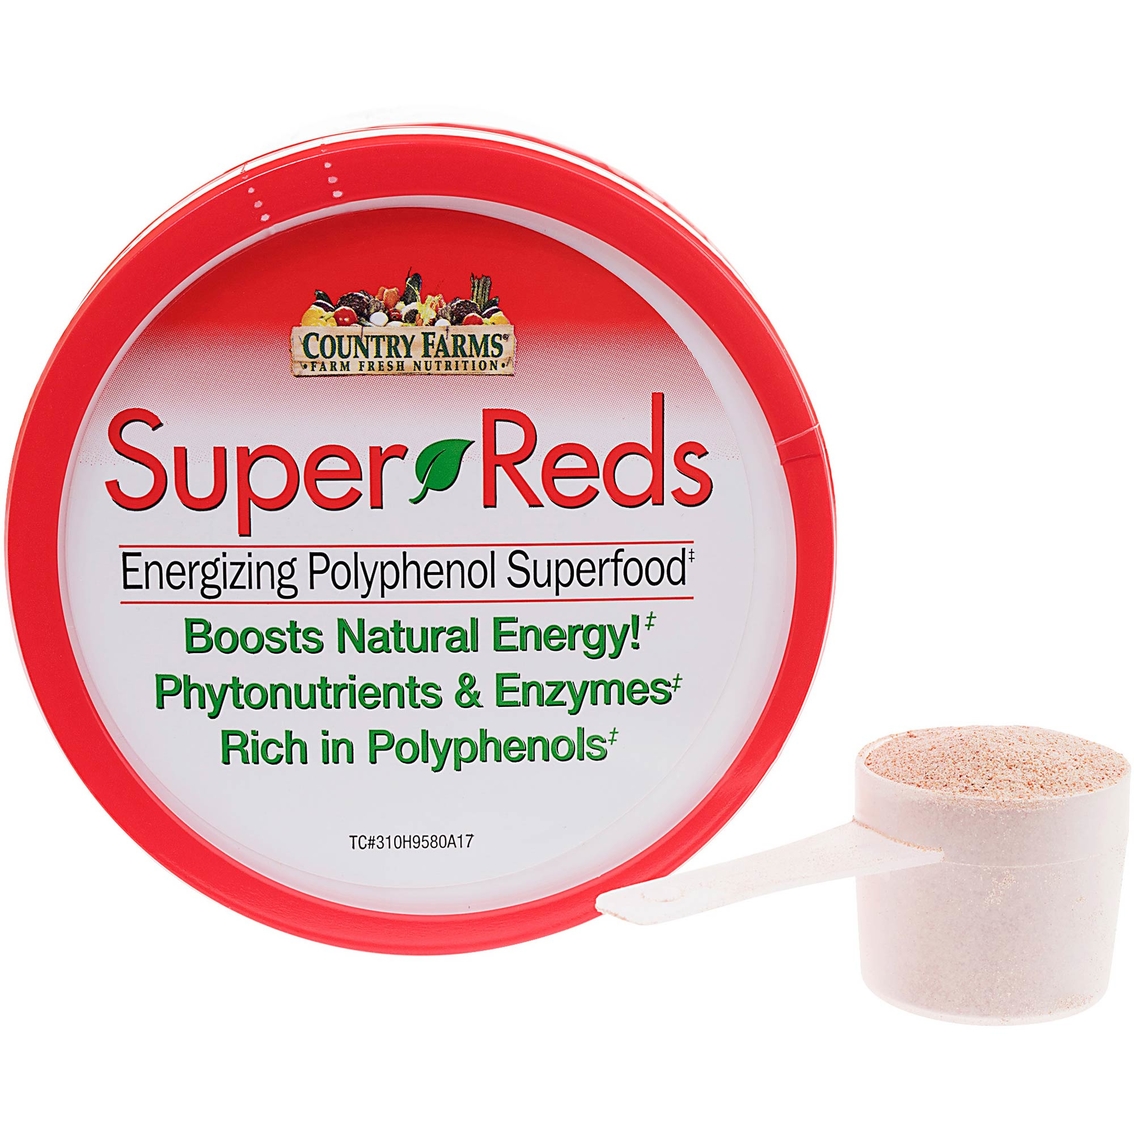 Country Farms Super Reds 20 Servings - Image 3 of 3